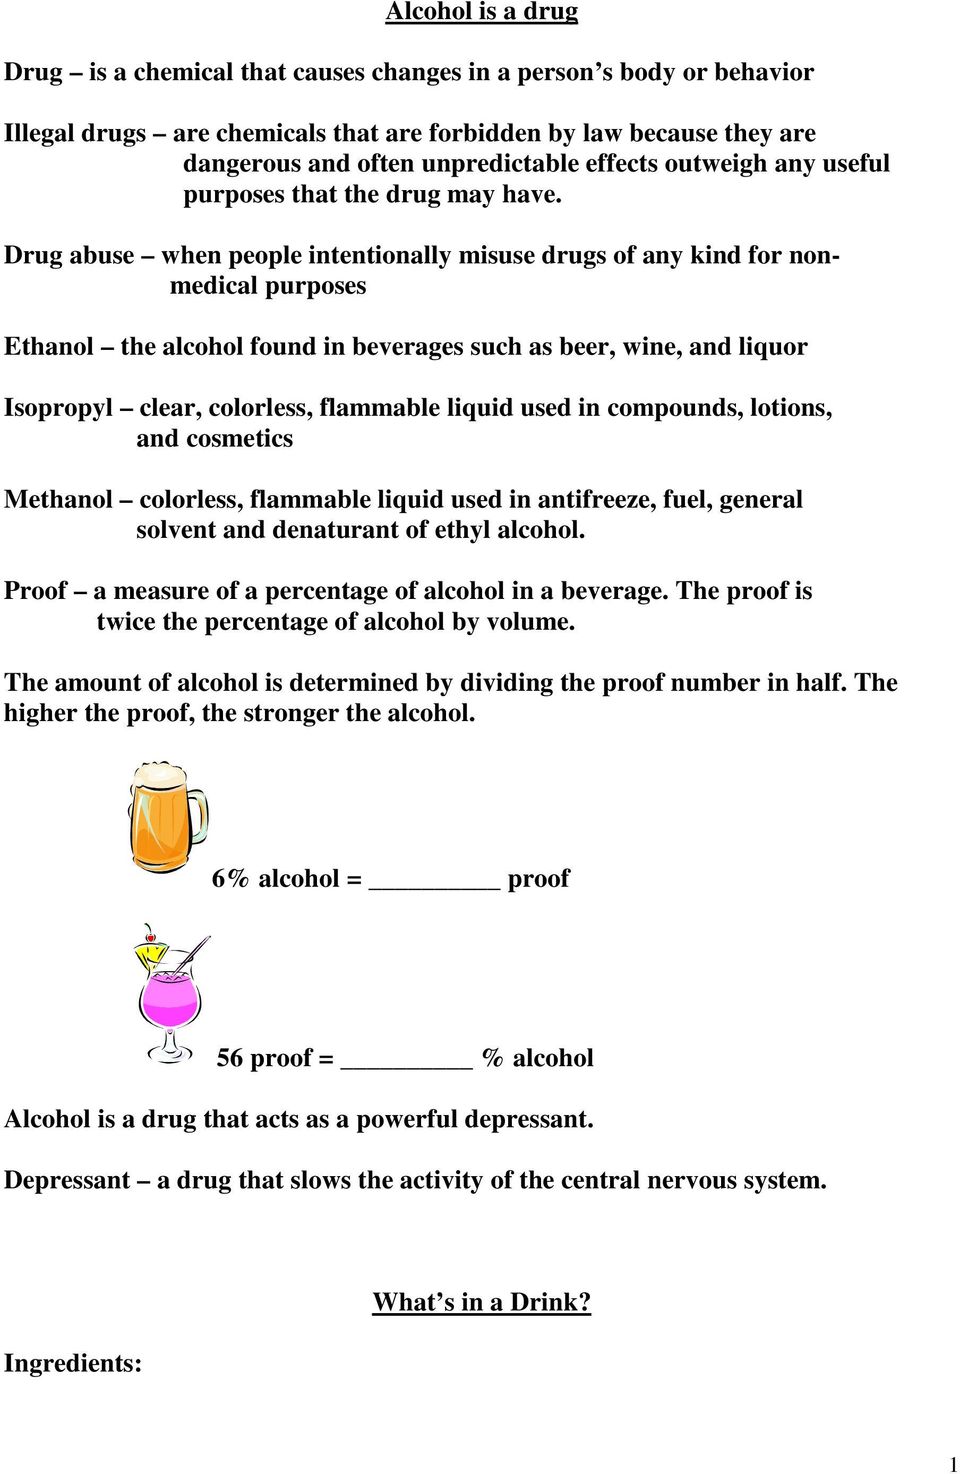 Drug abuse when people intentionally misuse drugs of any kind for nonmedical purposes Ethanol the alcohol found in beverages such as beer, wine, and liquor Isopropyl clear, colorless, flammable